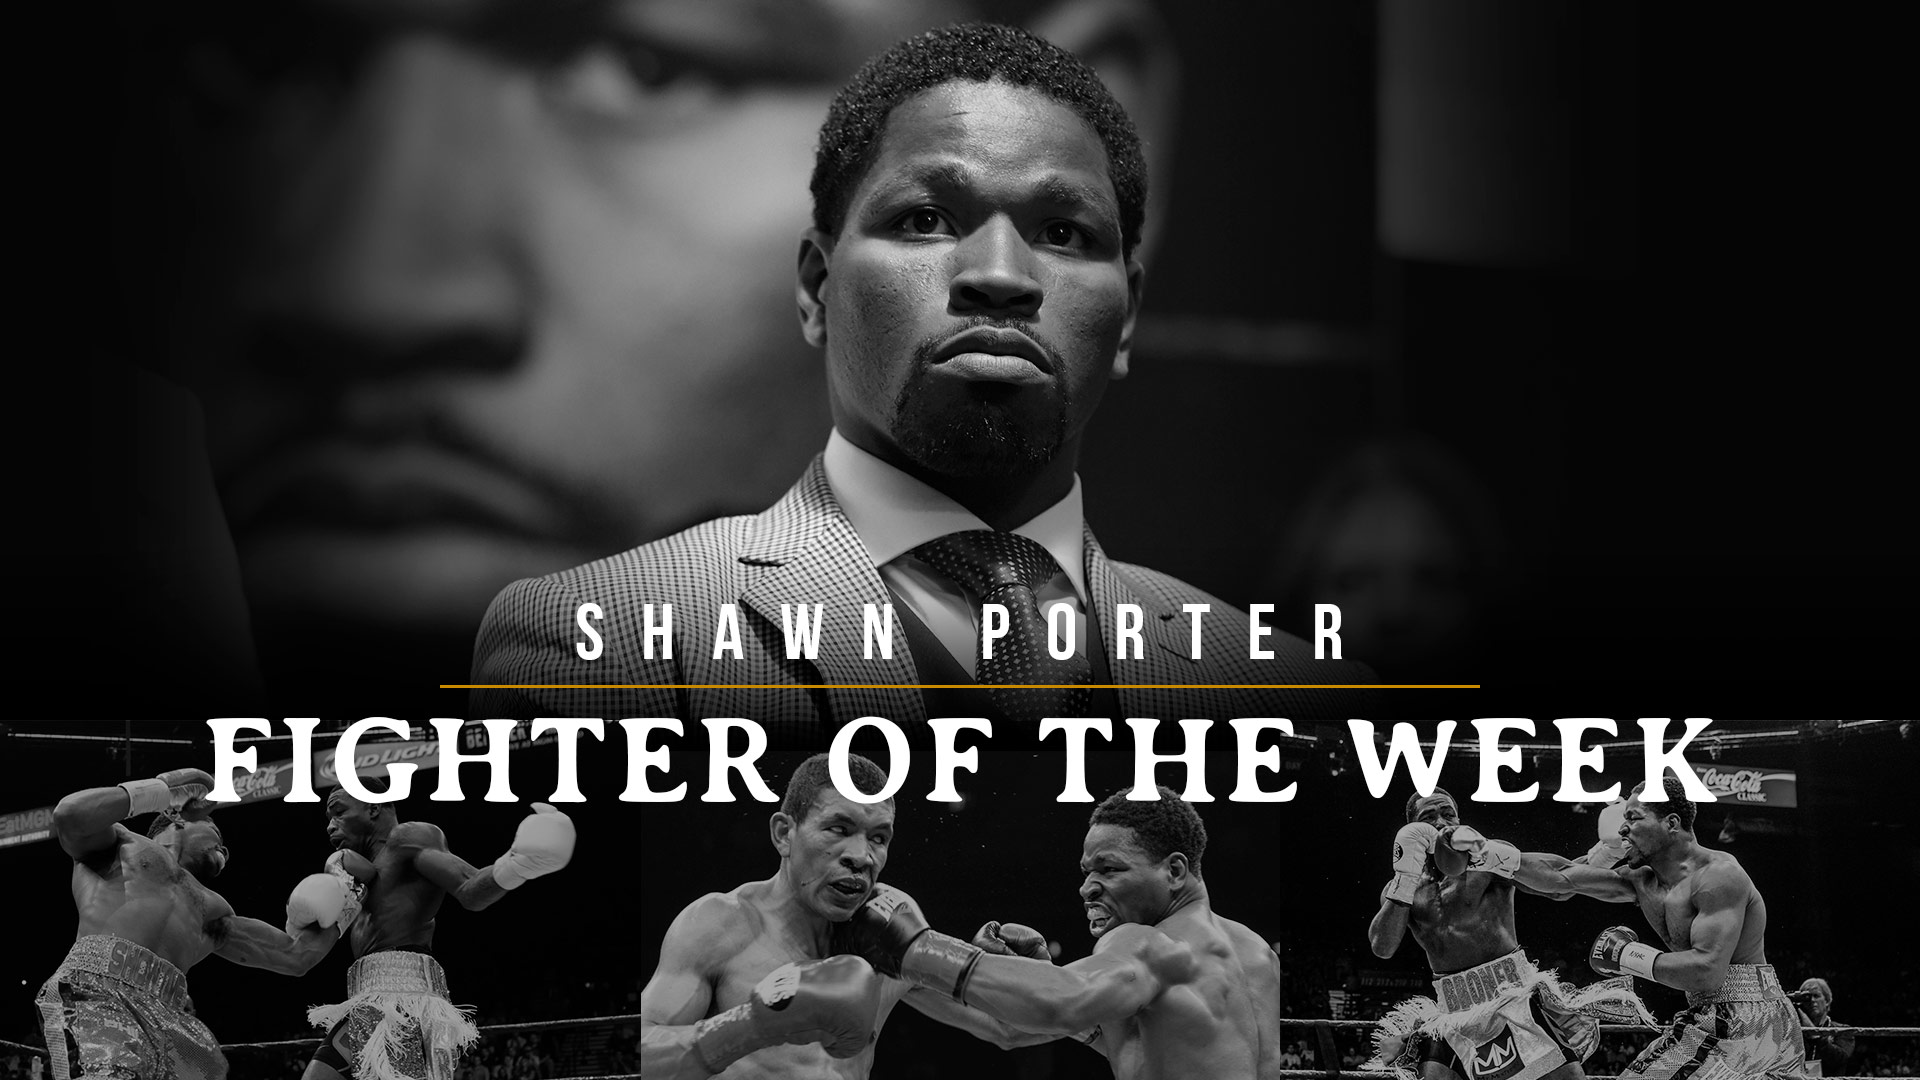 Fighter of the Week: Shawn Porter1920 x 1080